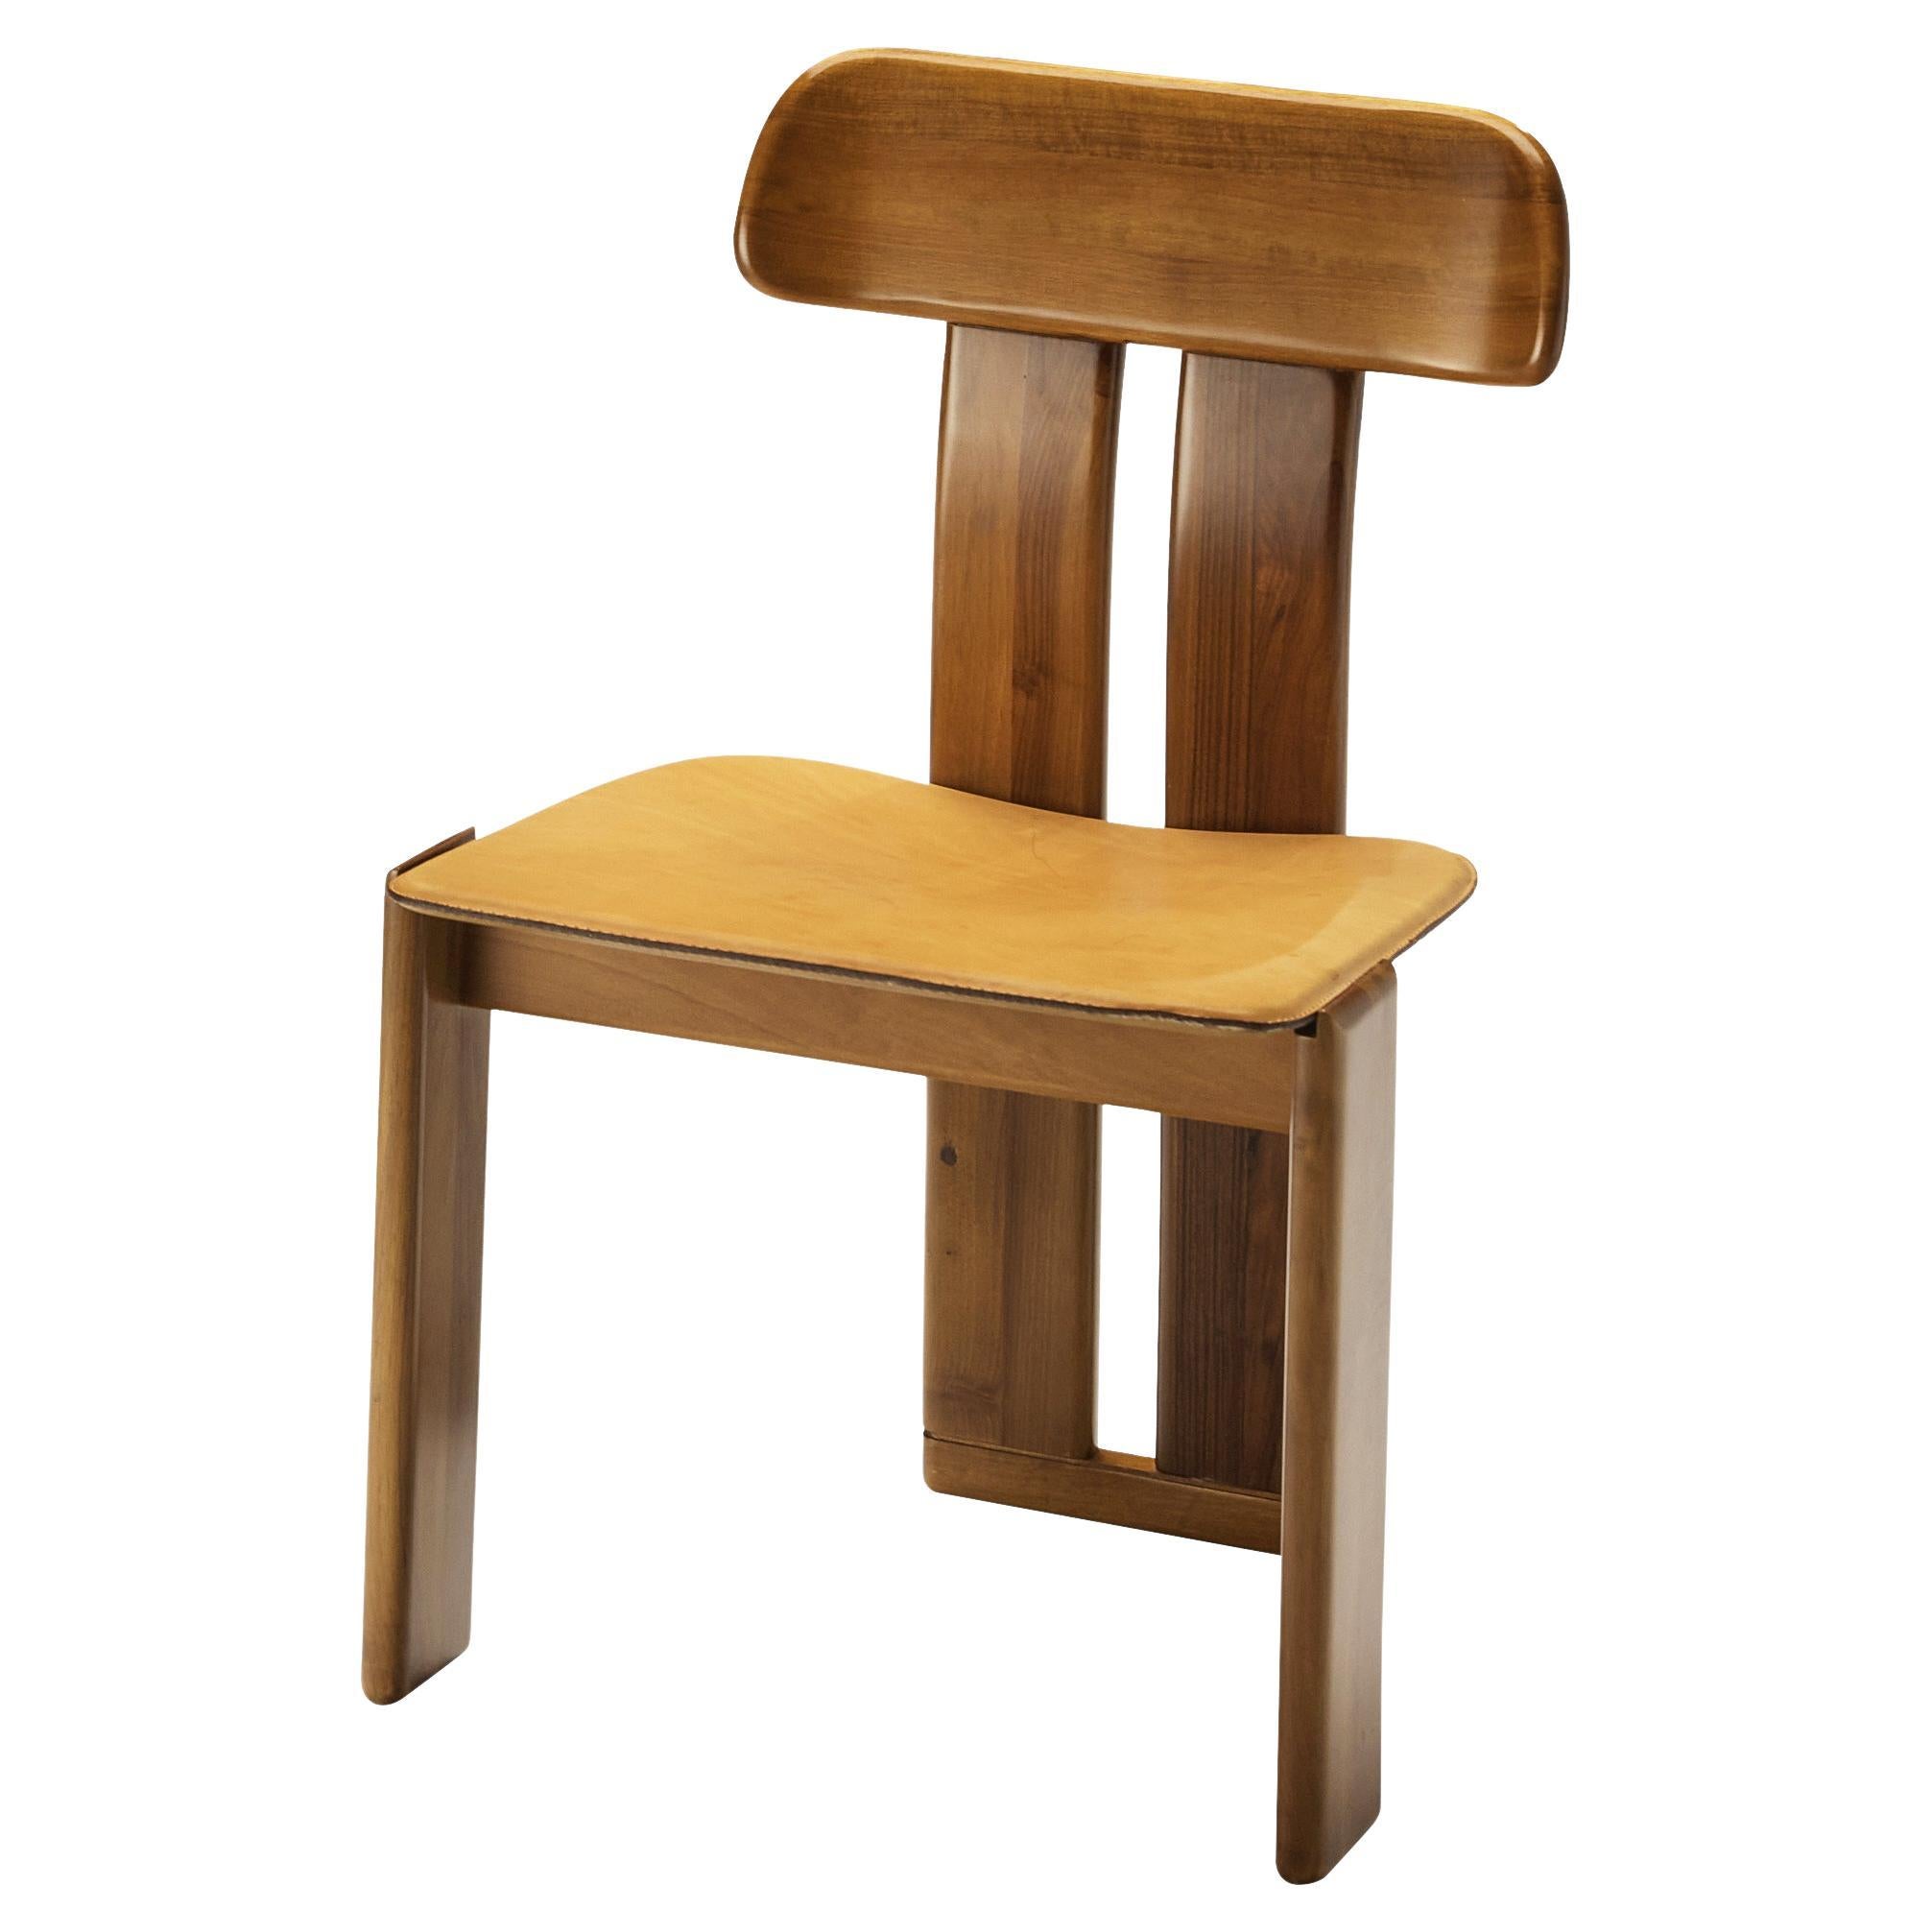 Mario Marenco for Mobil Girgi ‘Sapporo’ Dining Chair in Walnut and Leather 